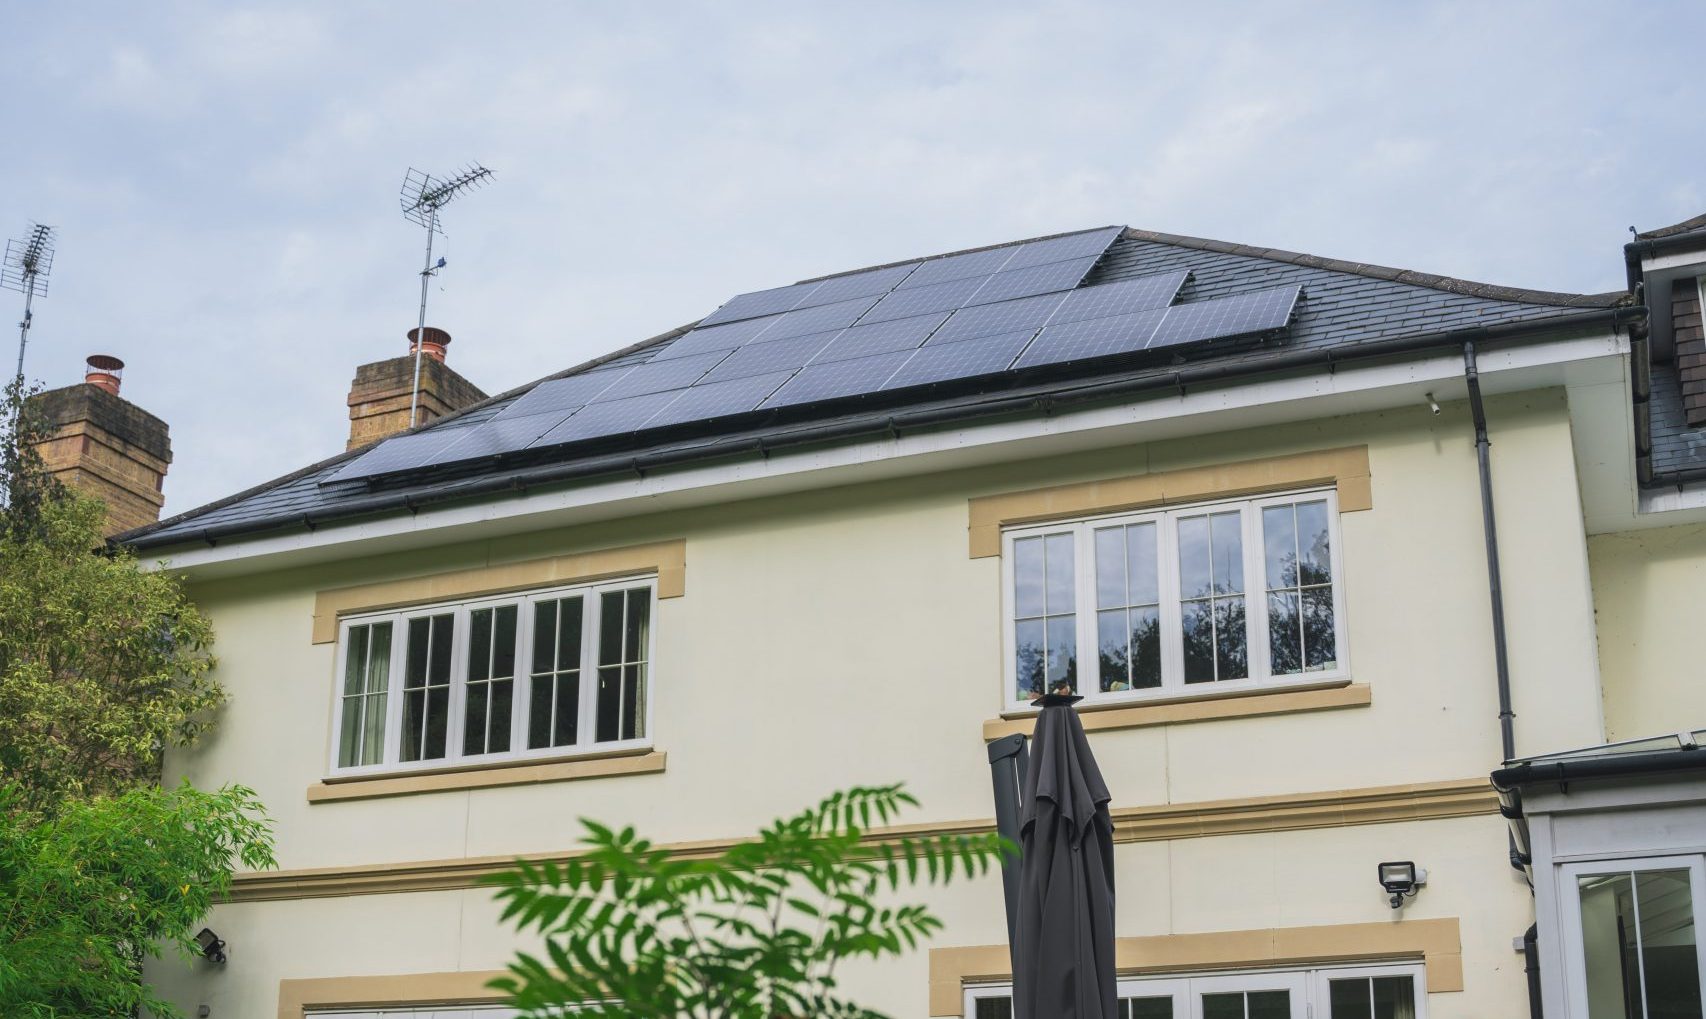 What Appliances Can Be Powered By Solar Panels?